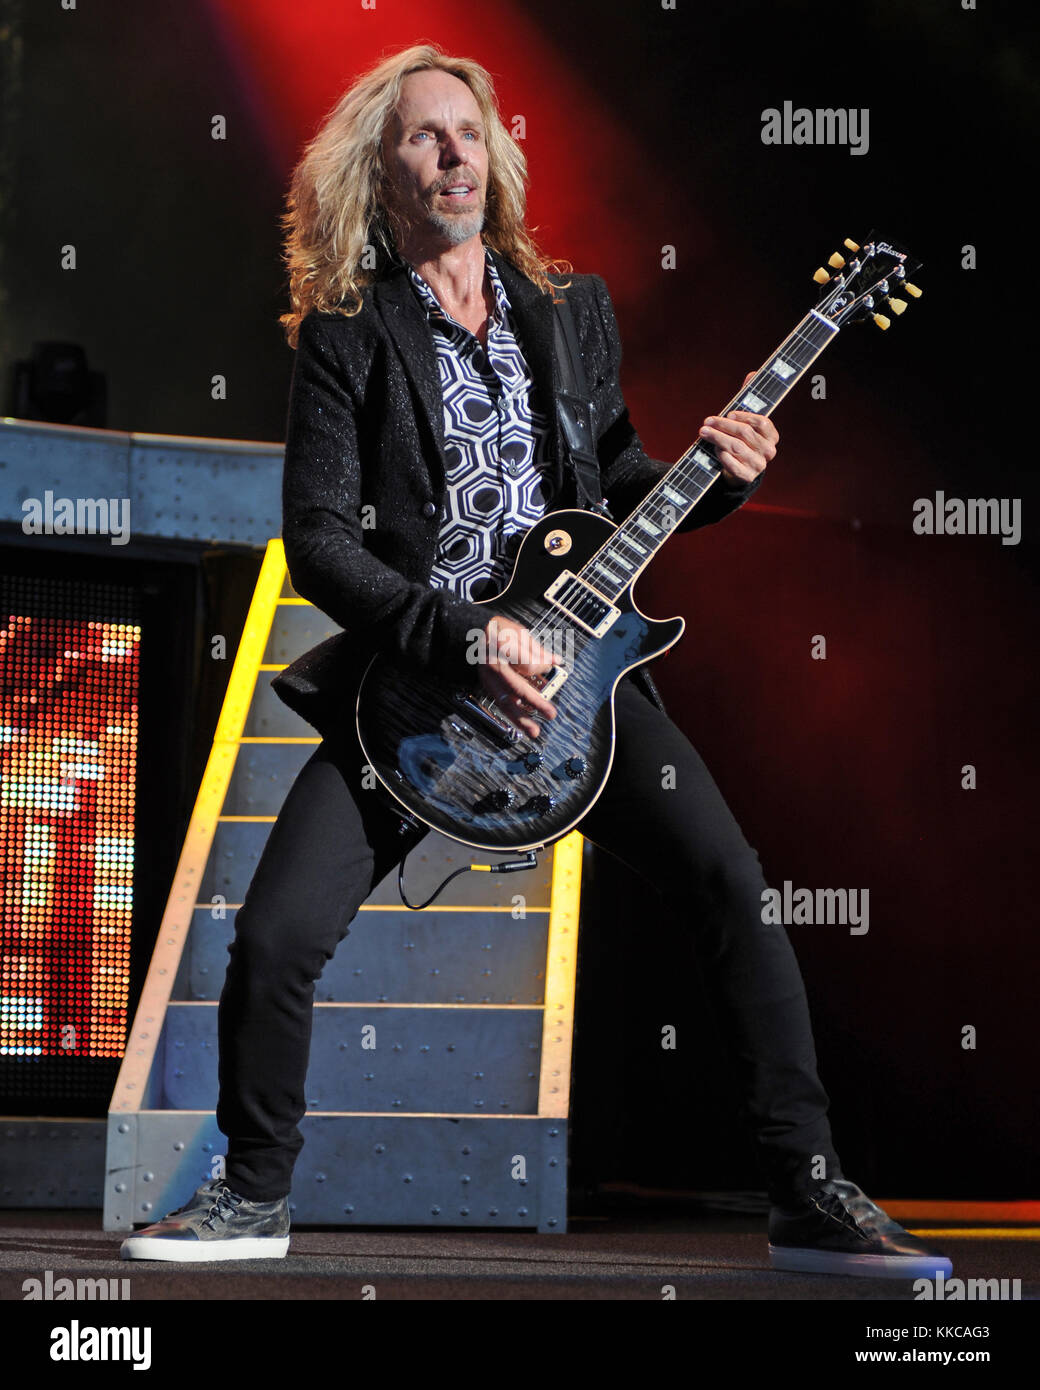 WEST PALM BEACH, FL - JUNE 25: Tommy Shaw of Styx performs at The Coral Sky Amphitheater on June 25, 2015 in West Palm Beach Florida  People:  Tommy Shaw Stock Photo